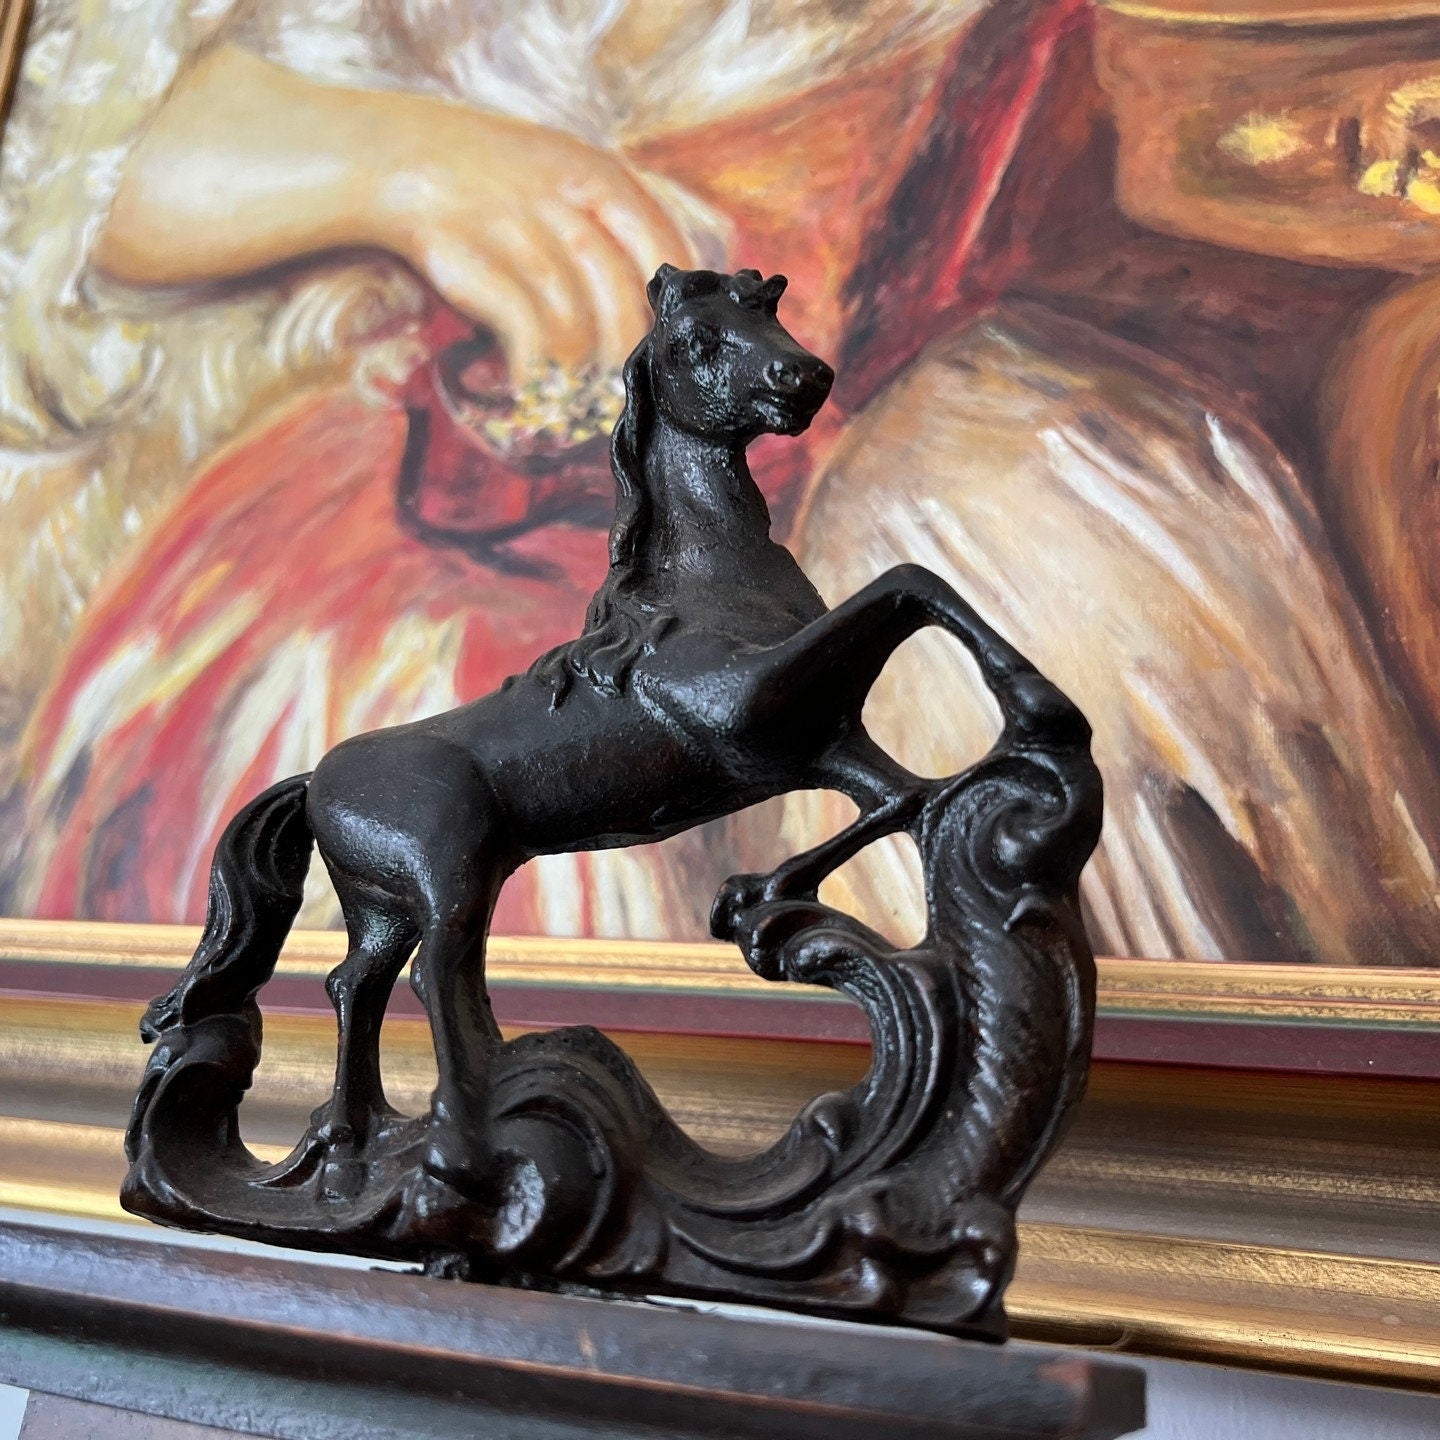 Antique black horse figurine in front of a colorful background painting.